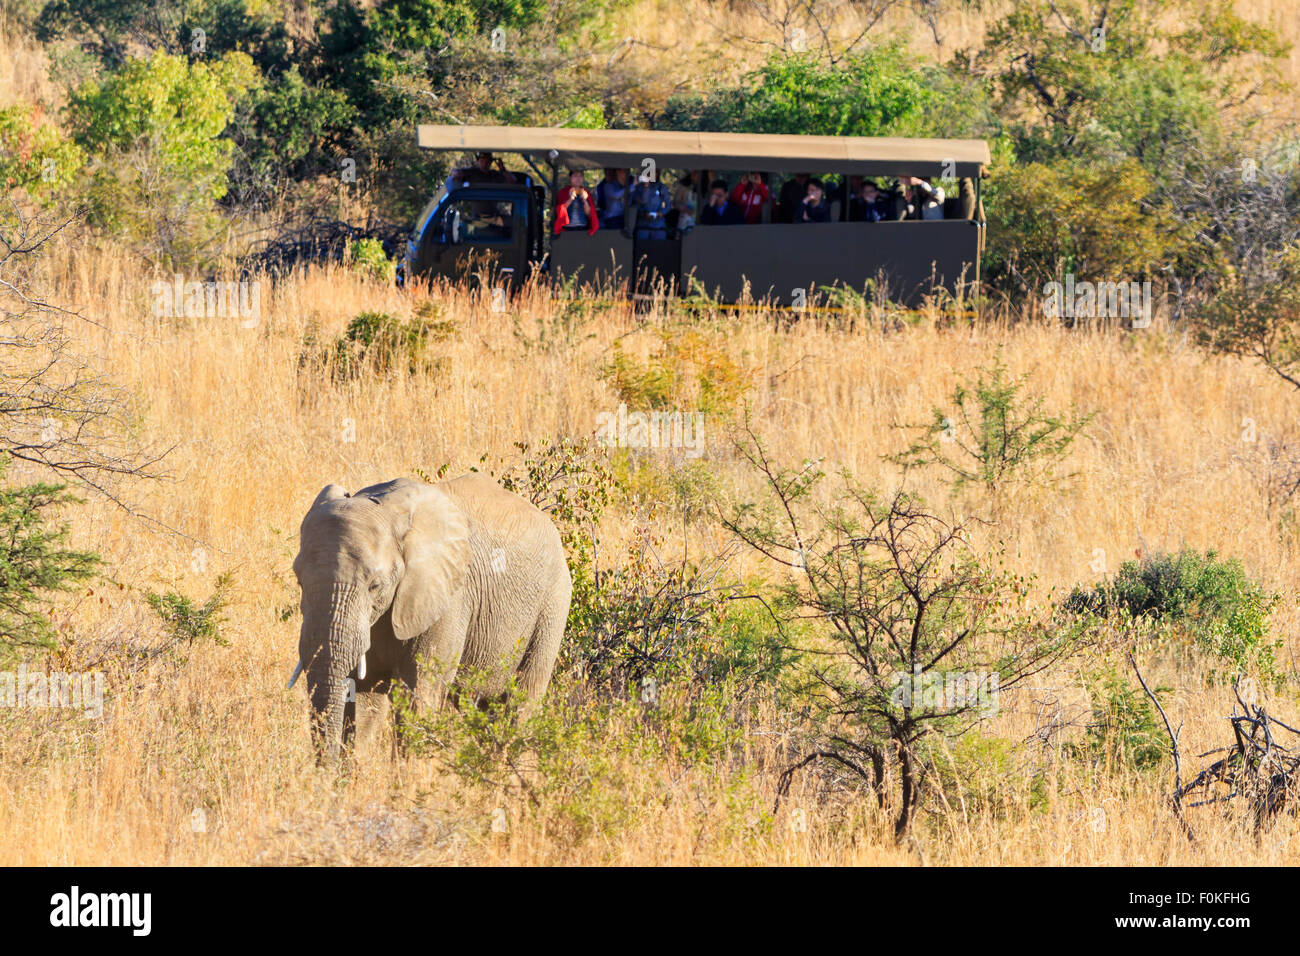 South Africa, North West, Bojanala Platinum, African elephant watched by tour group at Pilanesberg Game Reserve Stock Photo